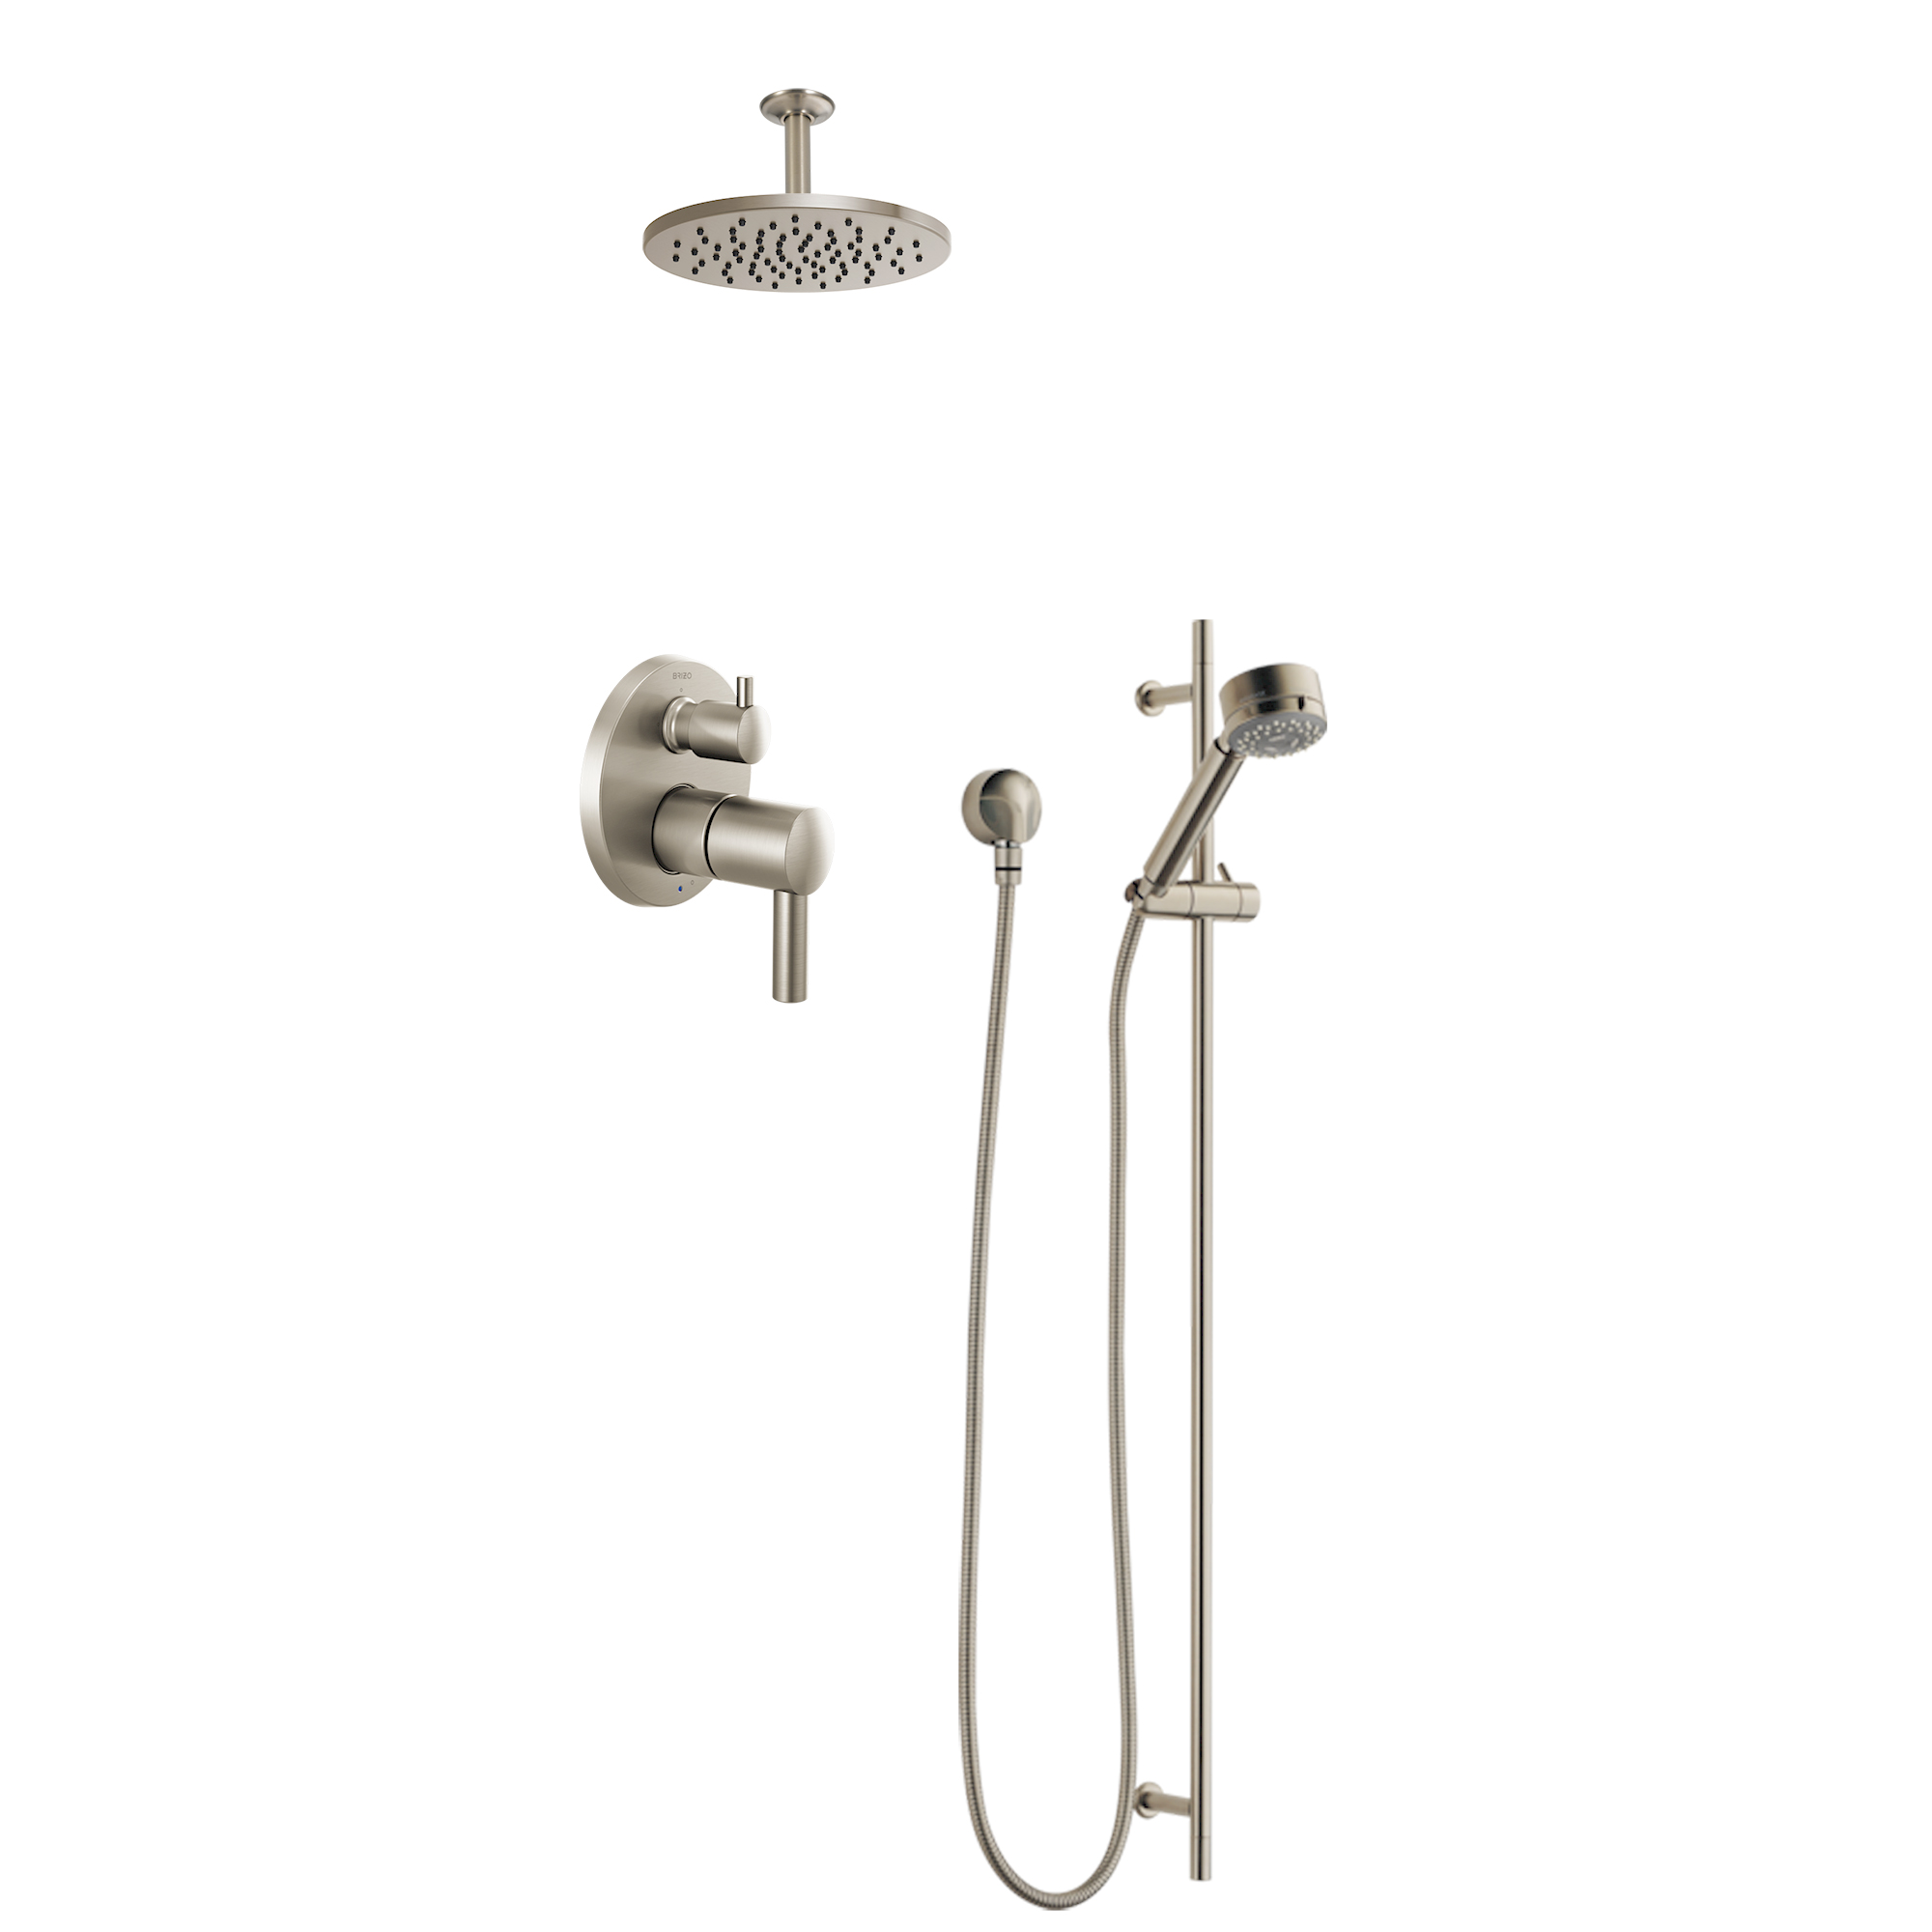 Brizo Odin Shower Set with Ceiling Mount Showerhead and Handheld on adjustable bar in Brushed Nickel BRODIN2BN5